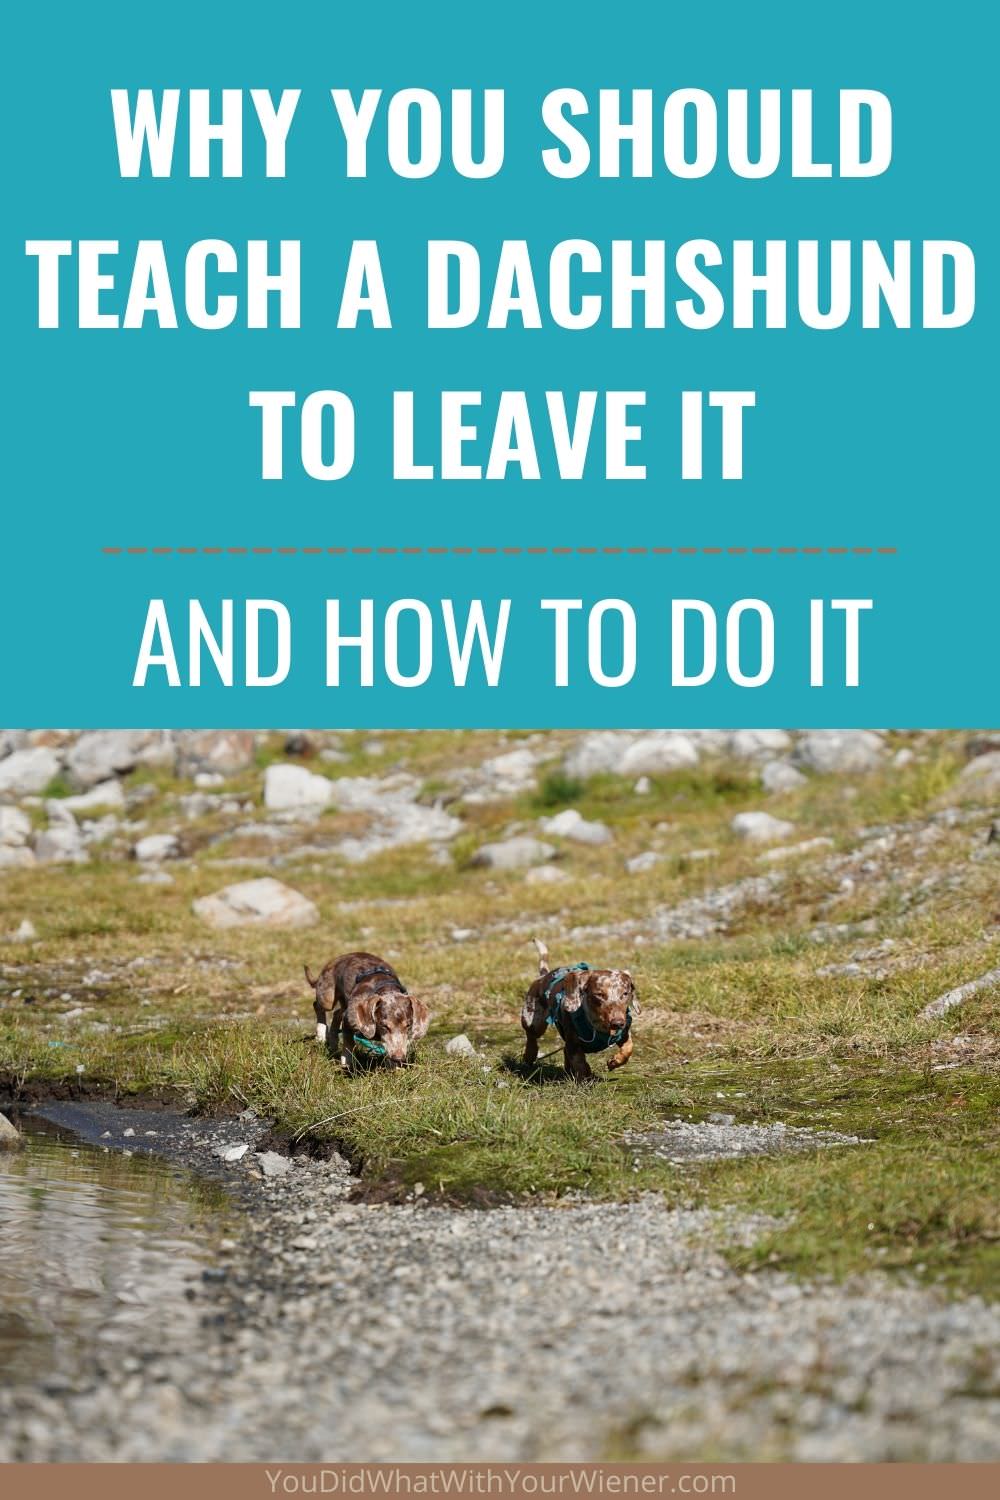 Does your dog know how to leave it? Here's why you should teach a Dachshund to leave it and how to do it.